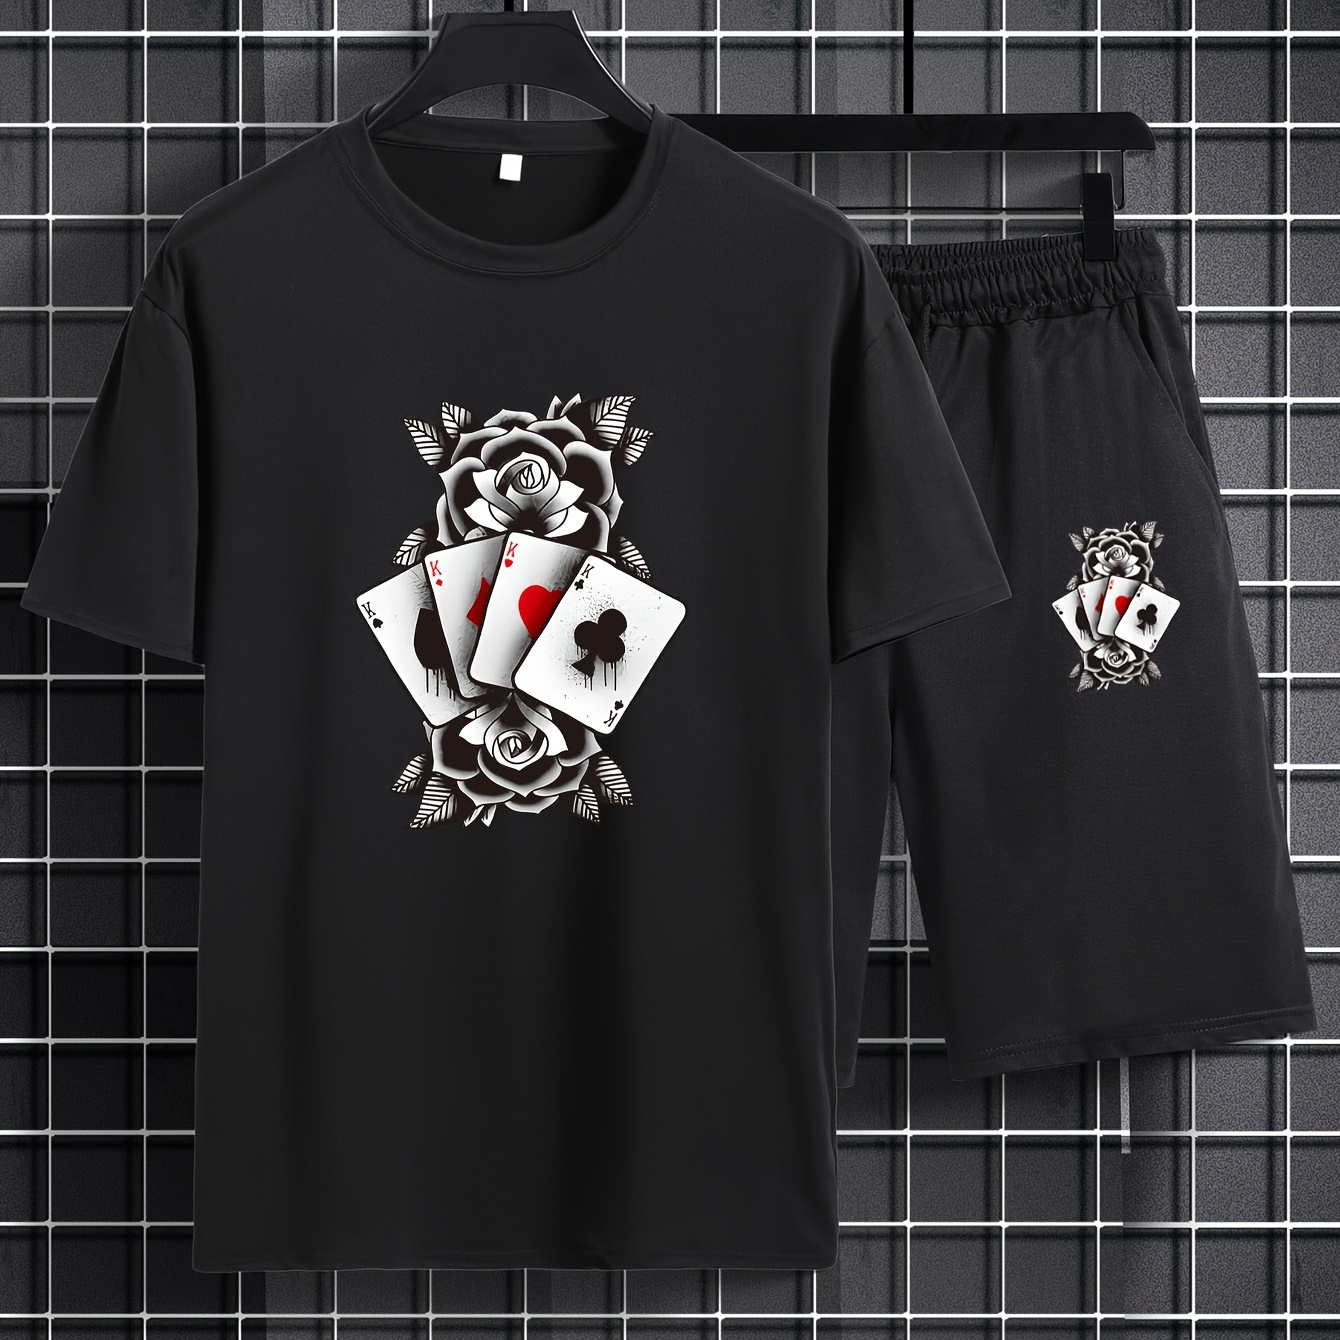 

Poker And Rose Flower Print, Mens 2 Piece Outfits, Comfy Short Sleeve T-shirt And Casual Drawstring Shorts Set For Summer, Men's Clothing